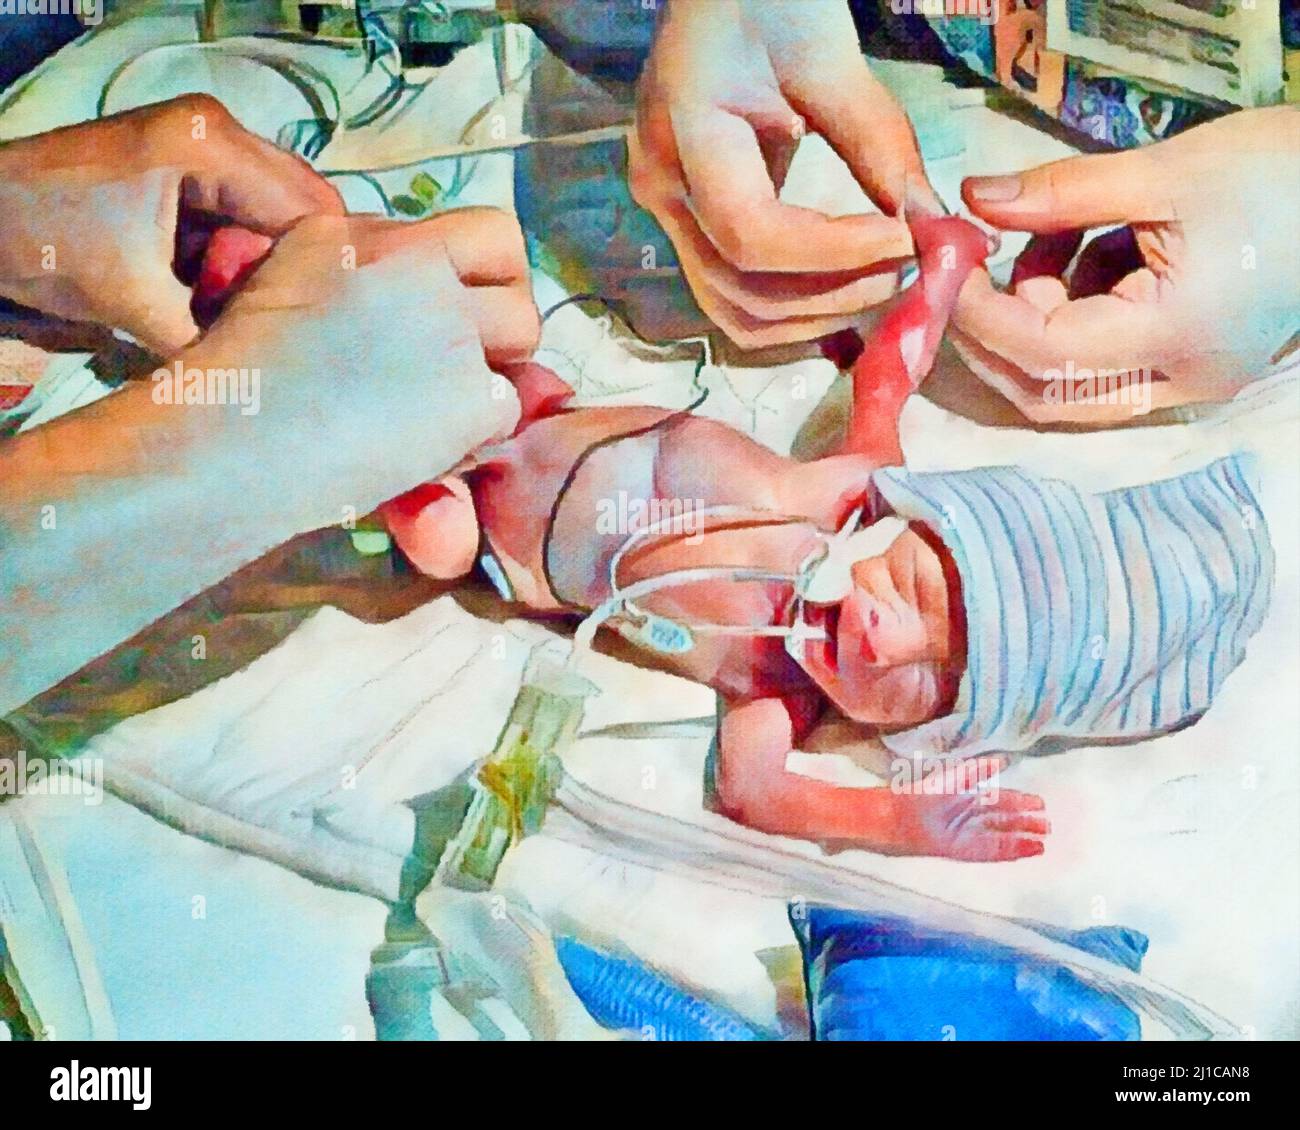 A premature baby is seen being treated by the hands of nurses in a neonatal intensive care unit in a digital watercolor painting Stock Photo